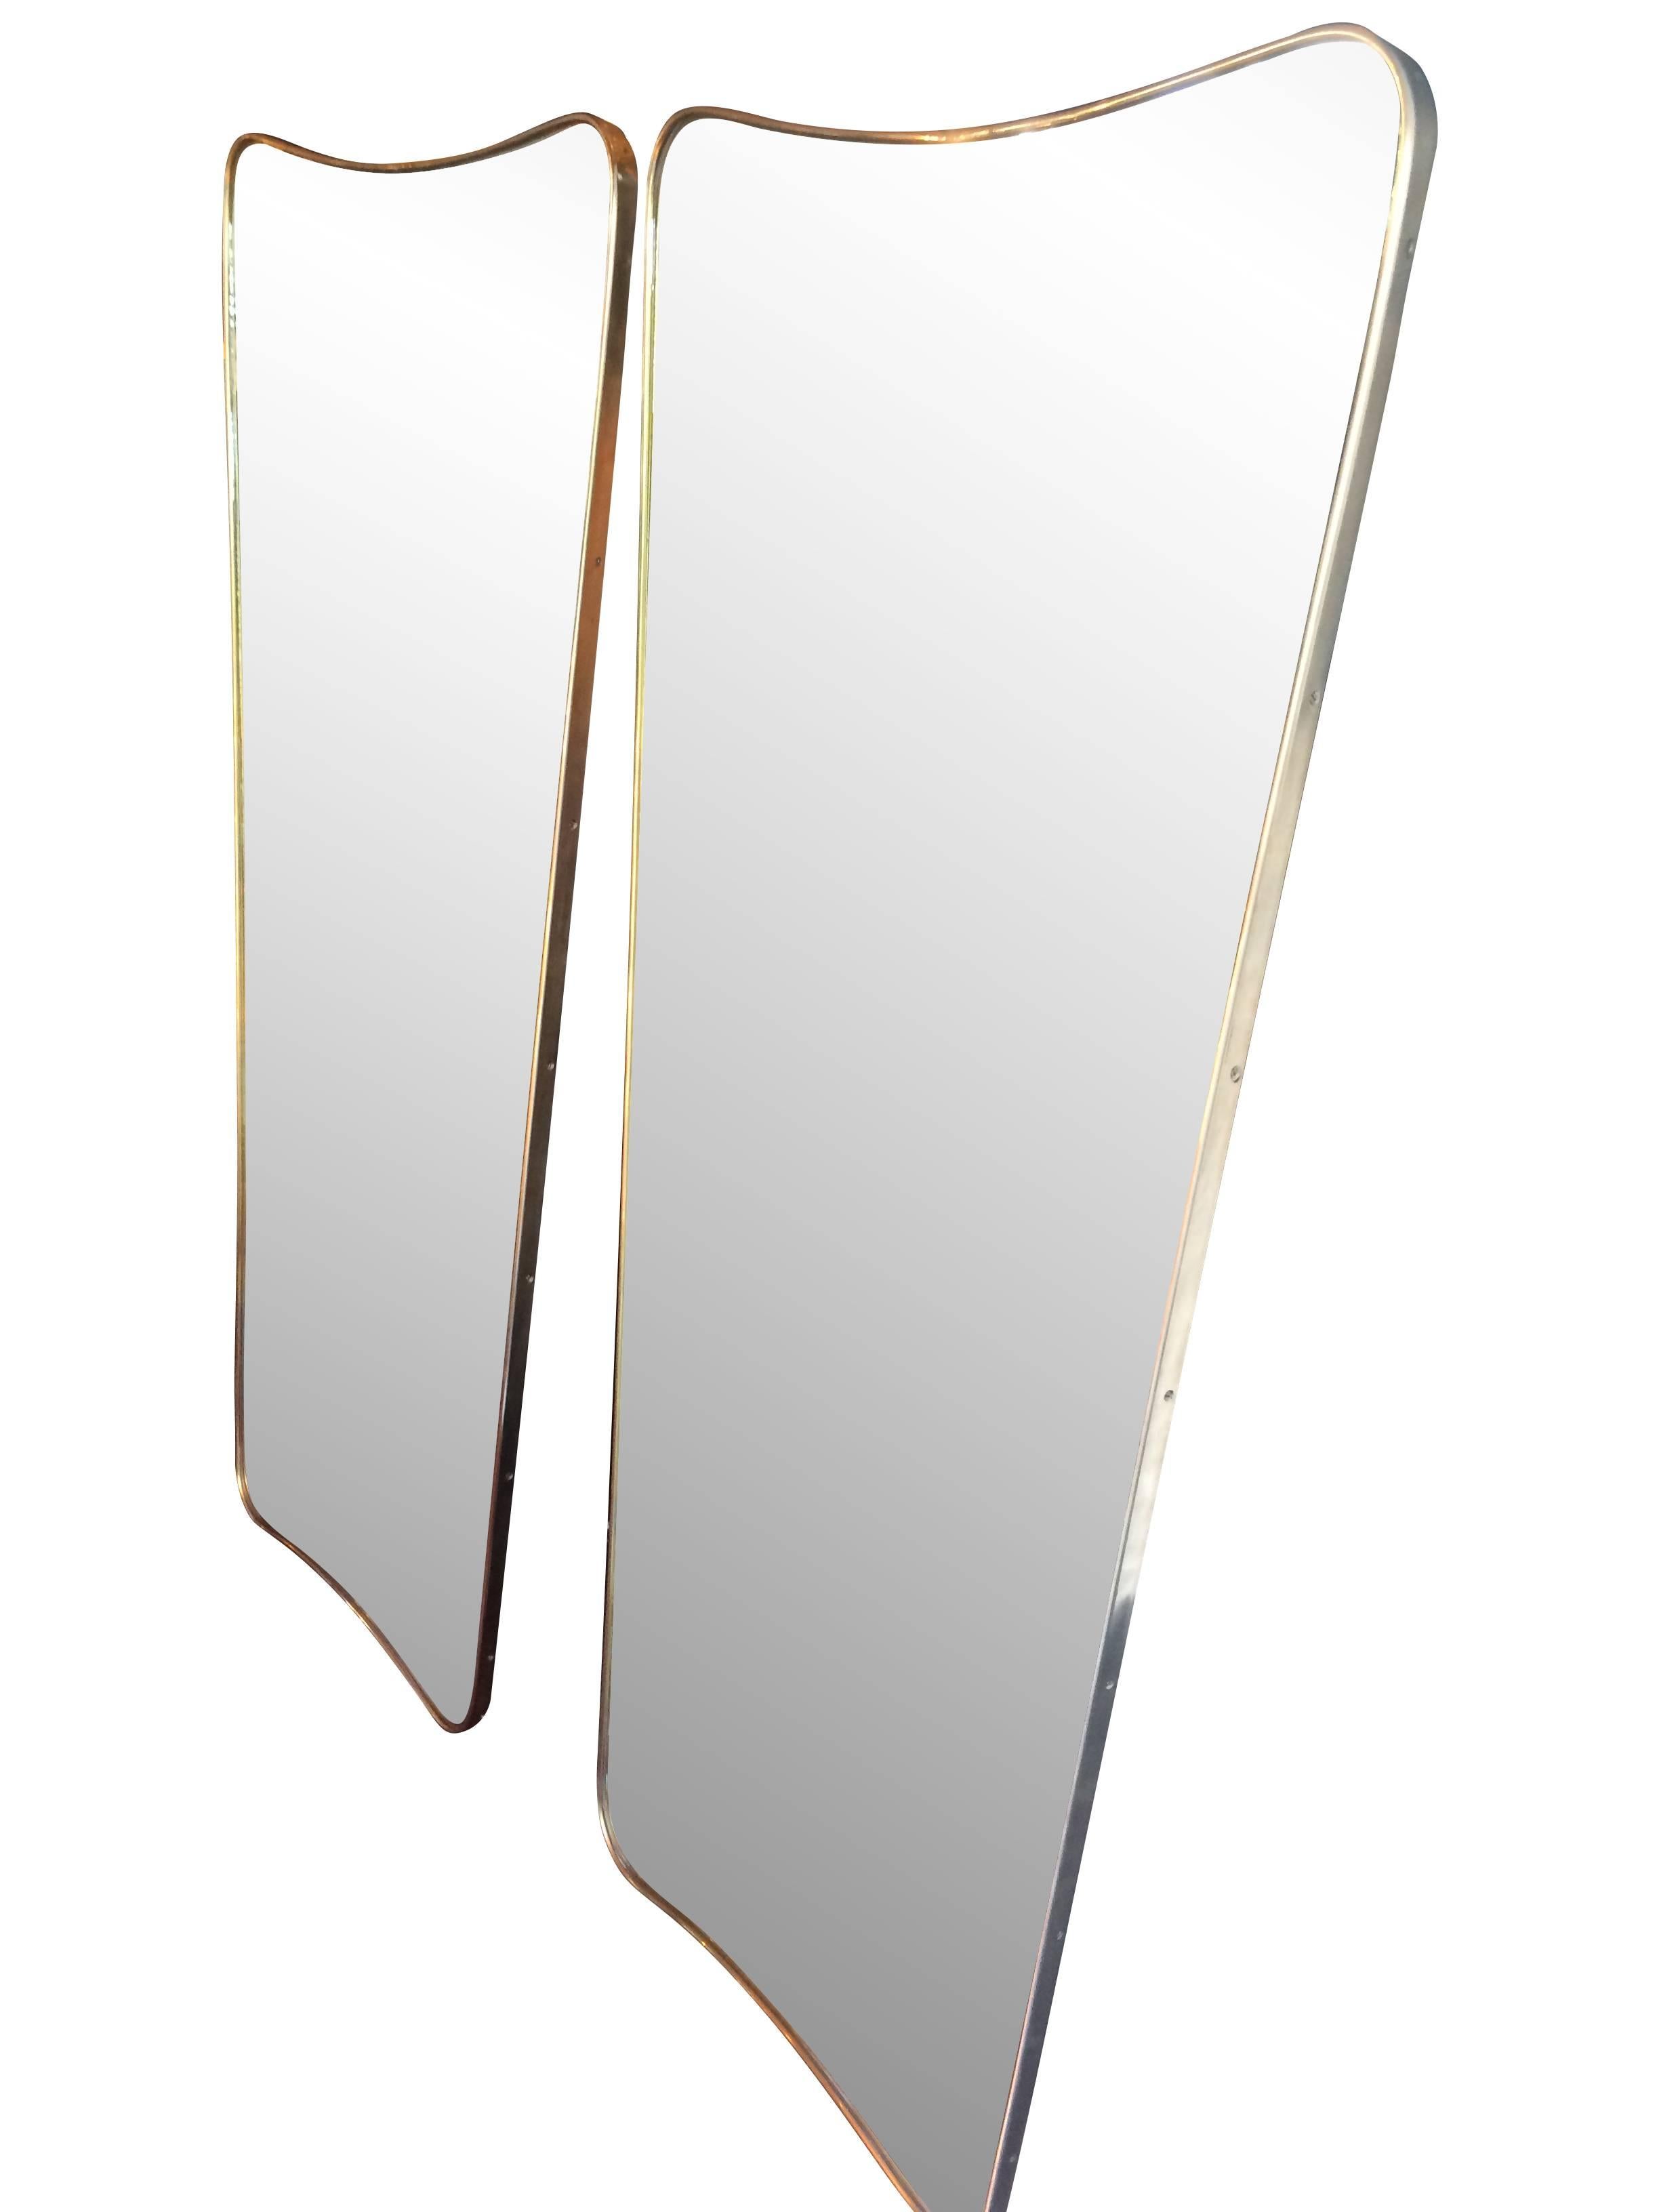 Mid-Century Modern Large Italian Shield Mirror With Brass Surround In The Style Of Gio Ponti